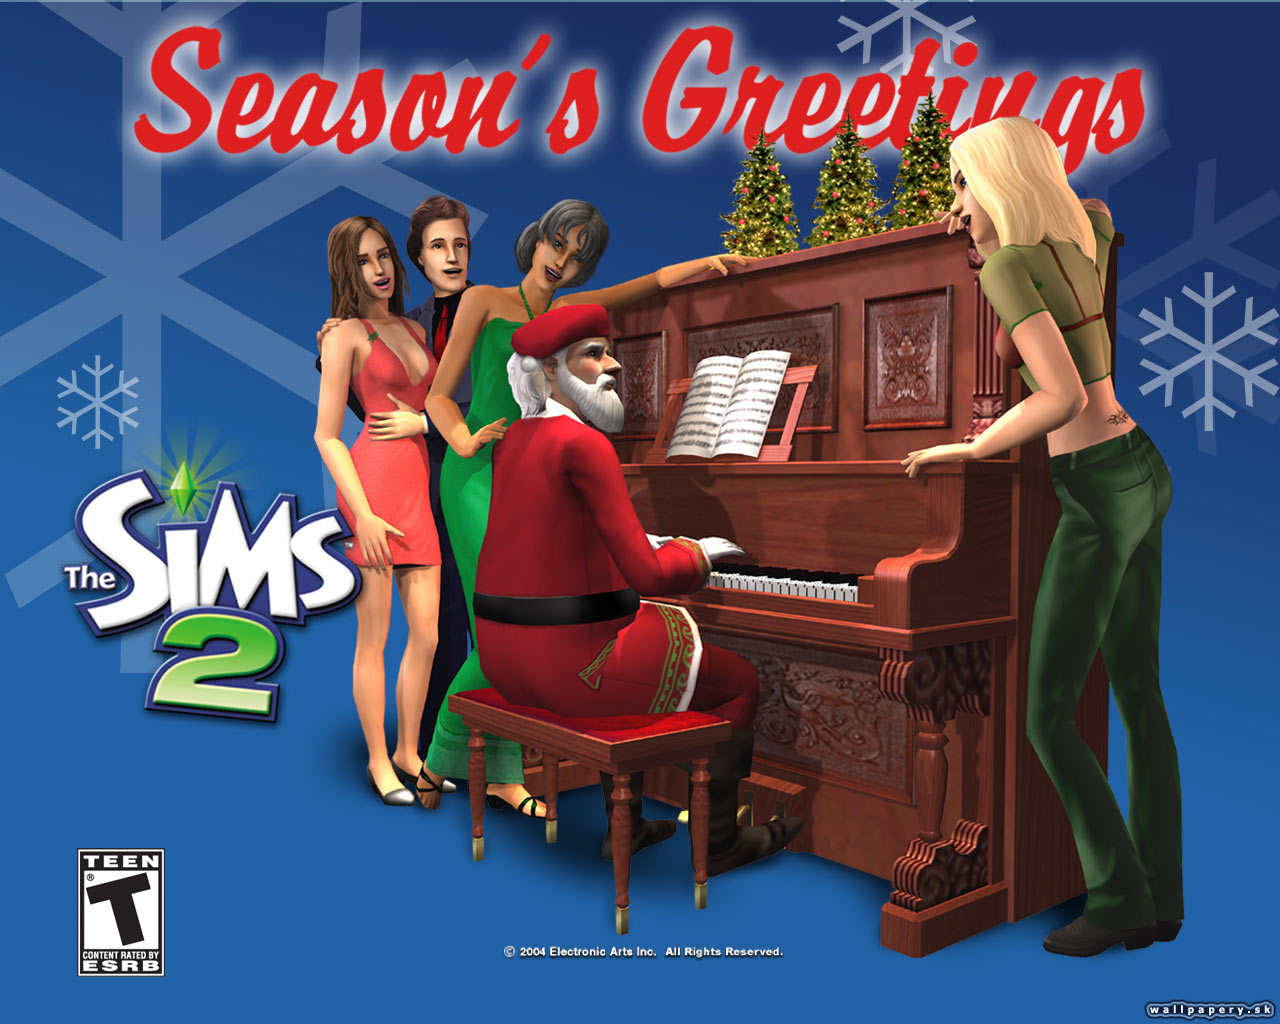 The Sims 2 - wallpaper 23